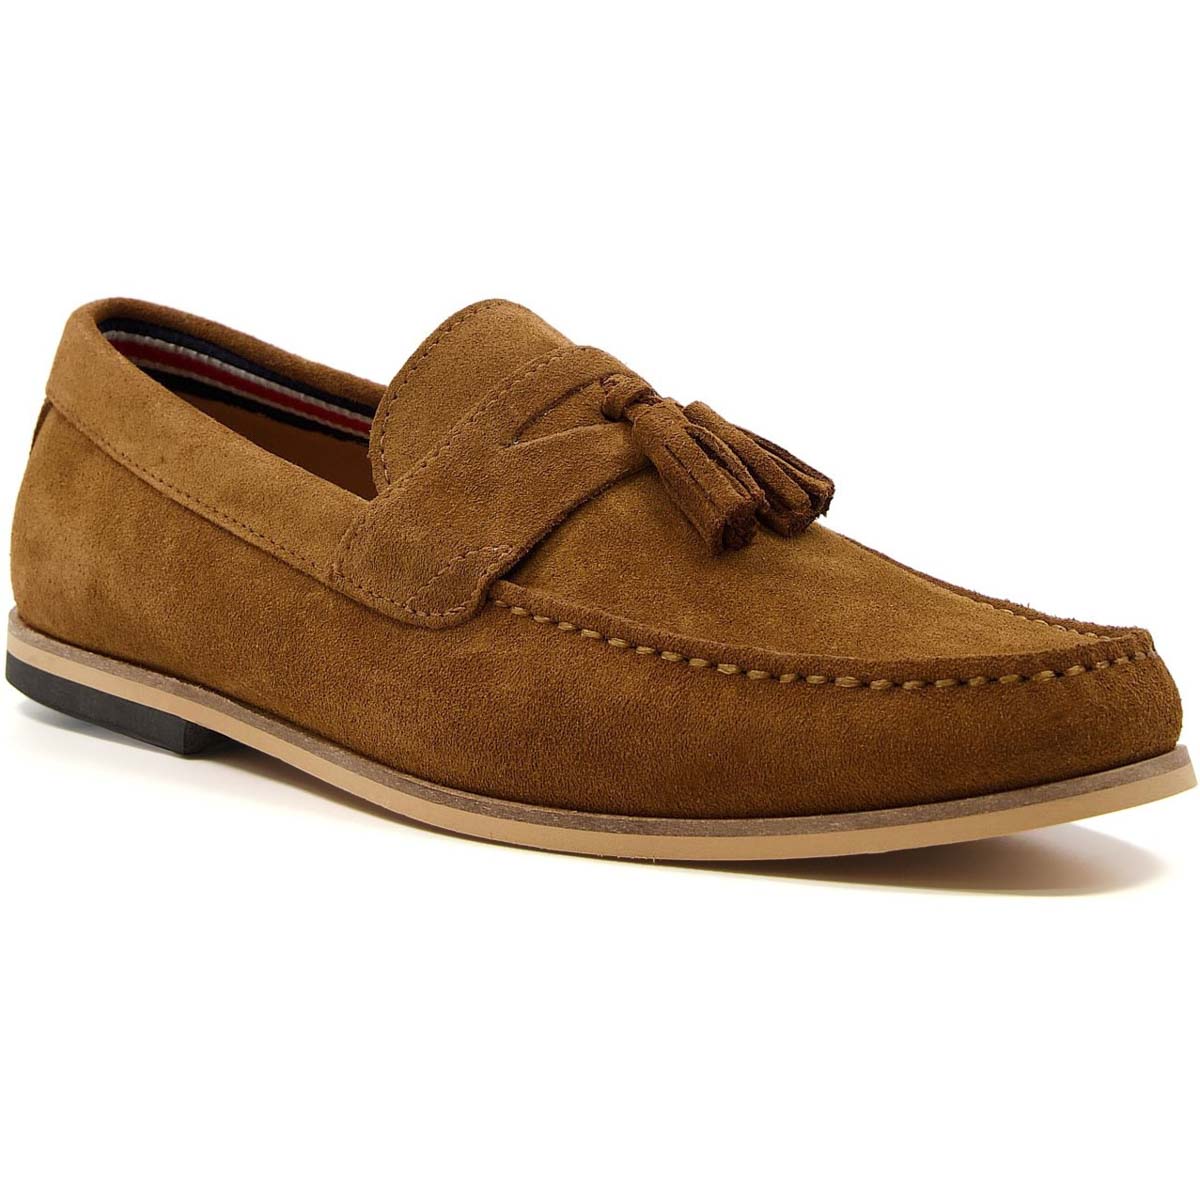 Dune London Bart Tan Mens Slip-on Shoes 2745063800083 in a Plain Leather in Size 8